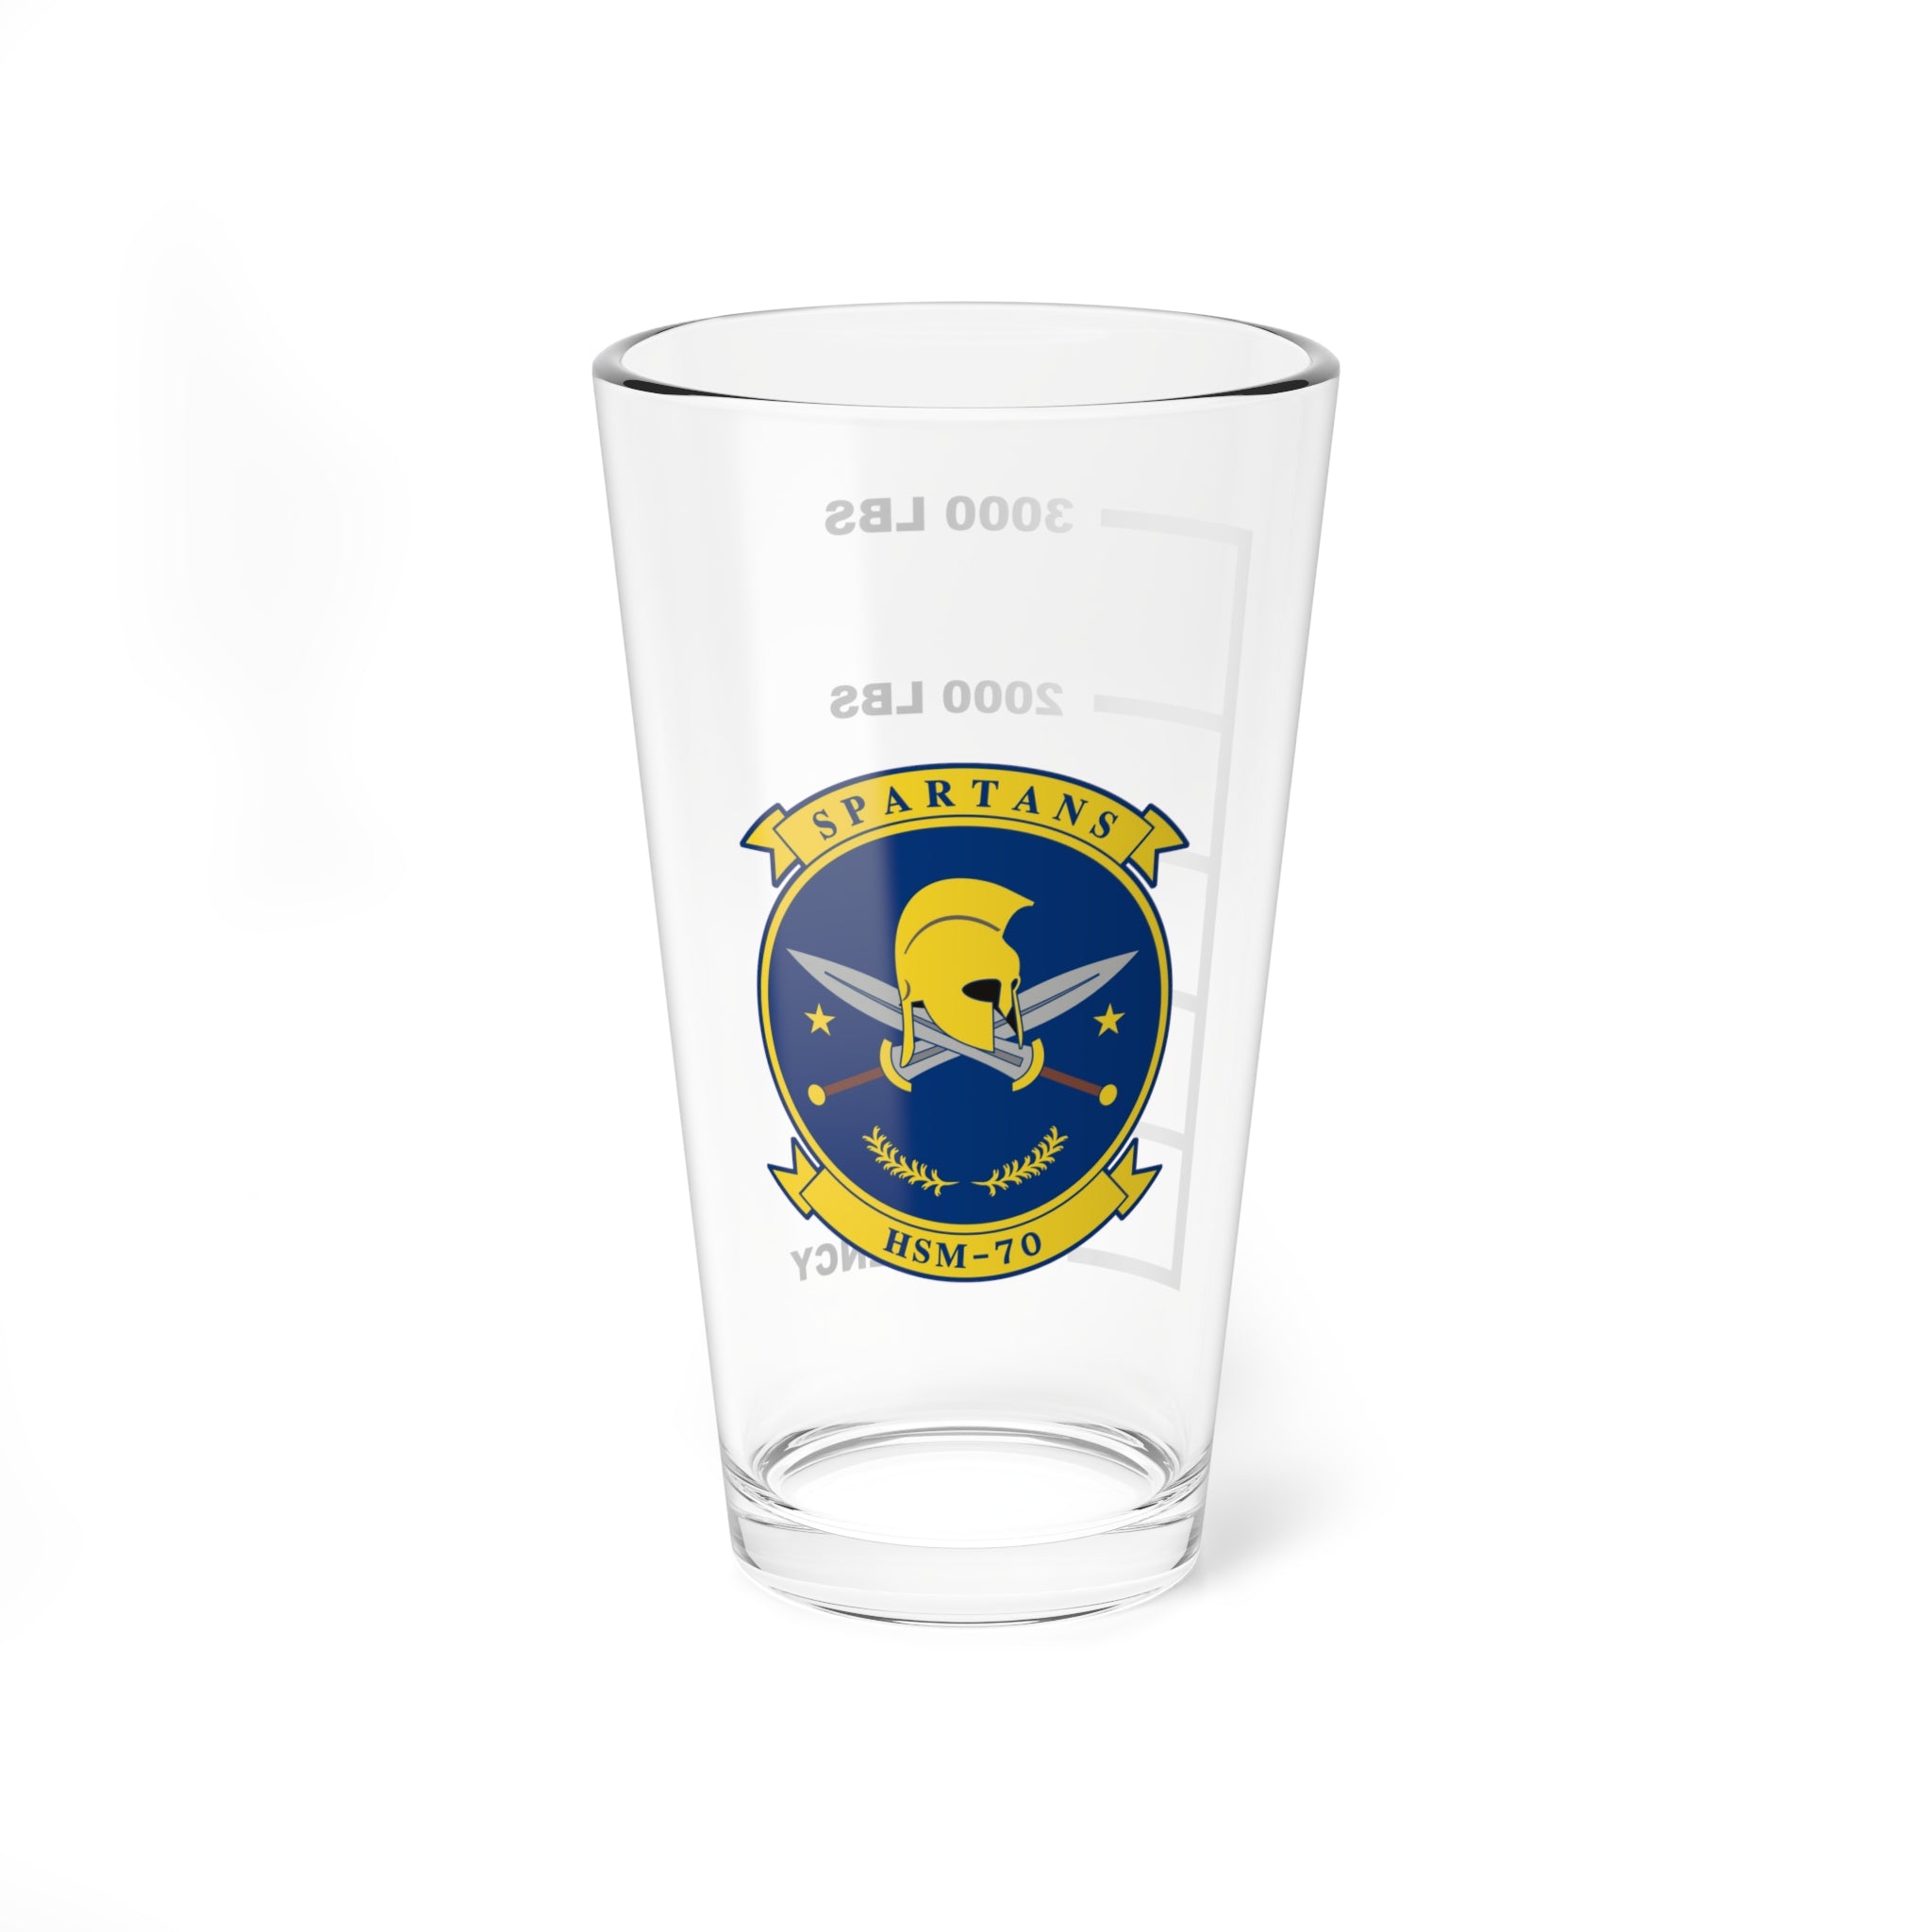 HSM-70 "Spartans" Fuel Low Pint Glass, MH-60R Helicopter Maritime Strike Squadron for Navy Retired and Veterans of Naval Aviation